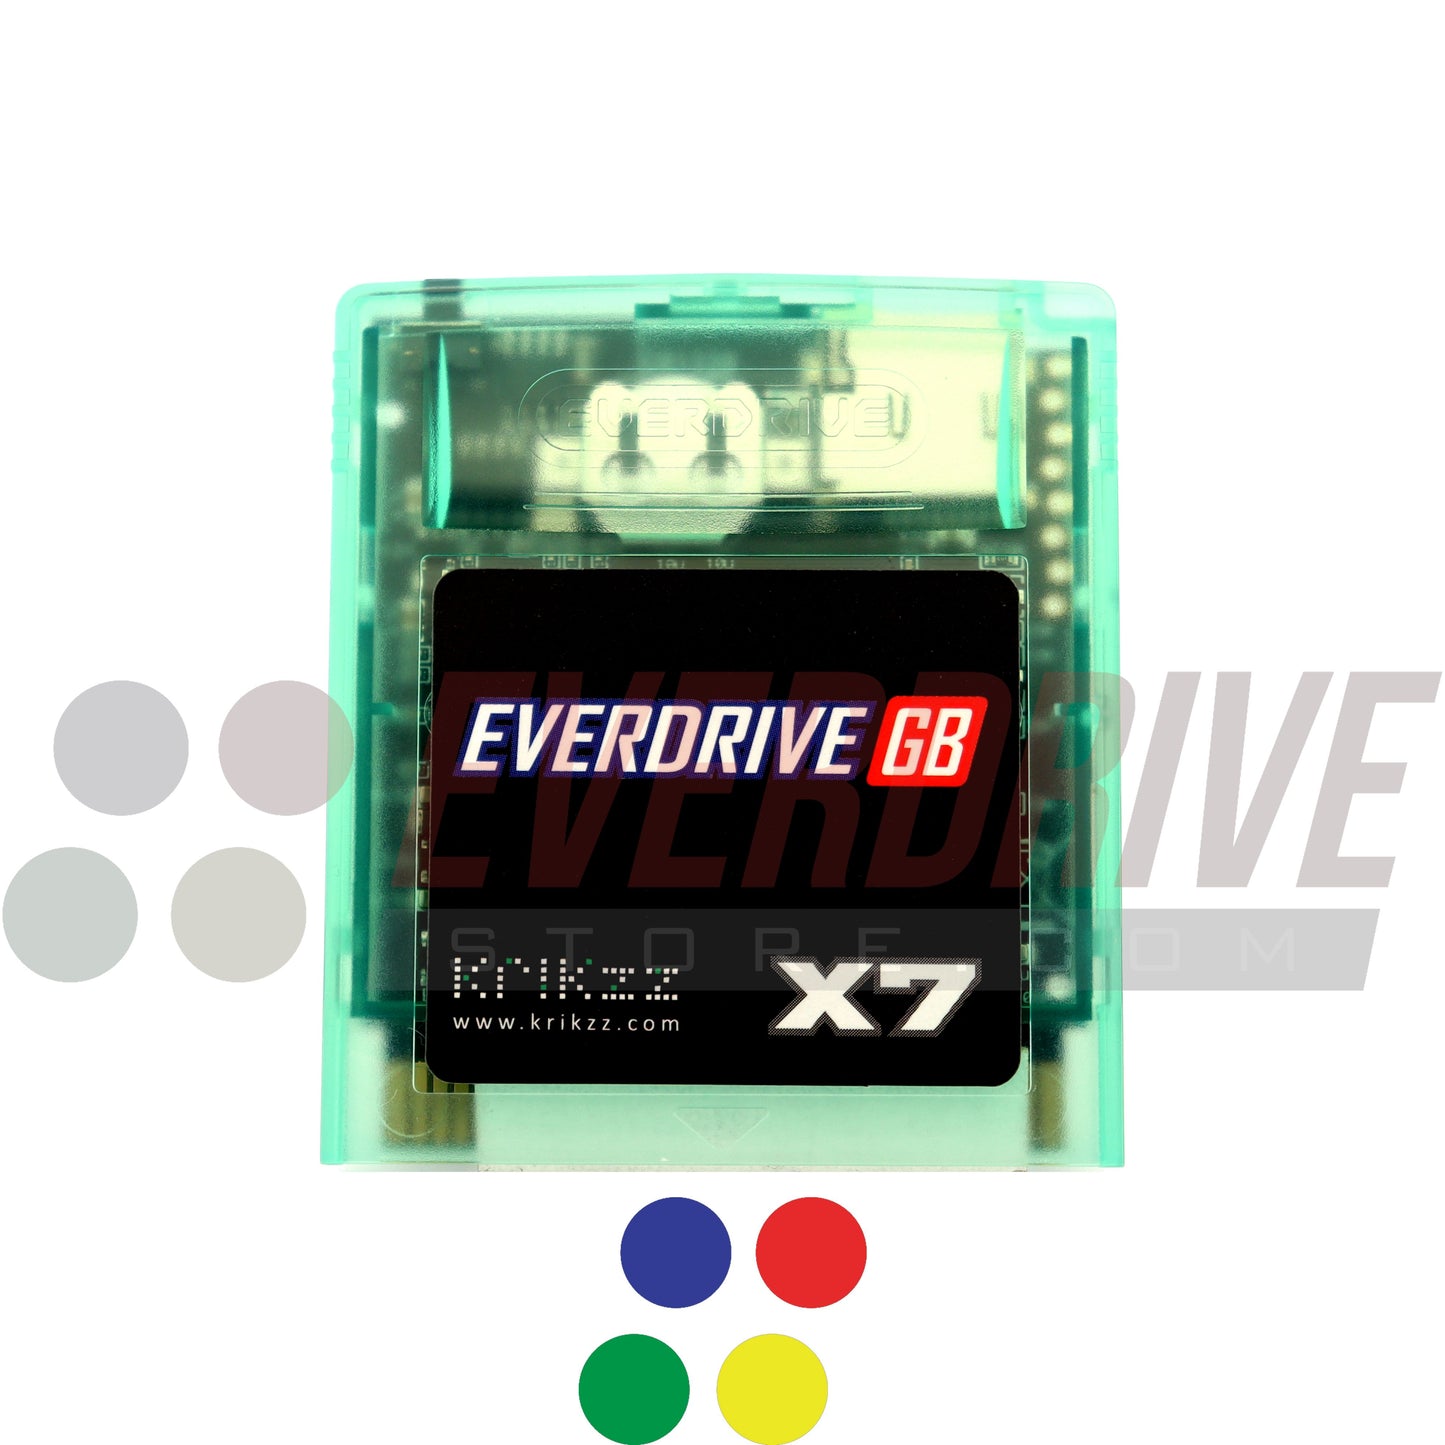 Everdrive GB X7 - Frosted Green